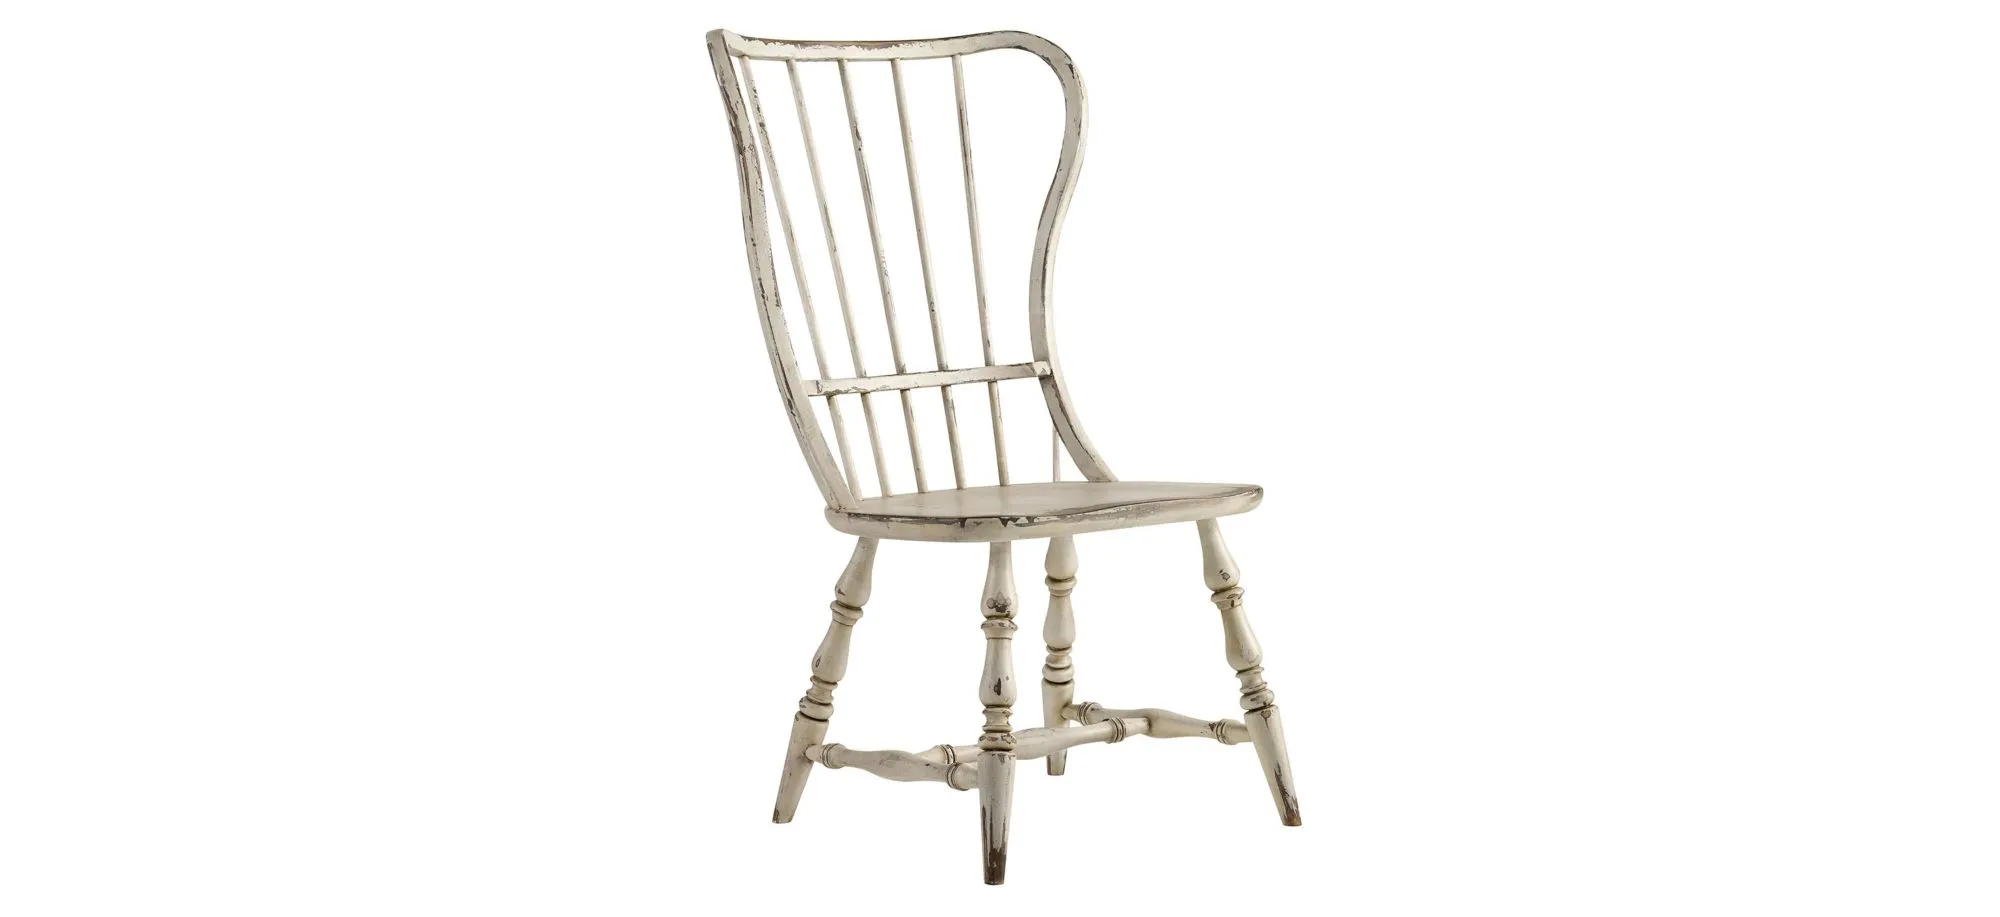 Sanctuary Spindle-Back Dining Chair in Vintage Chalky White by Hooker Furniture